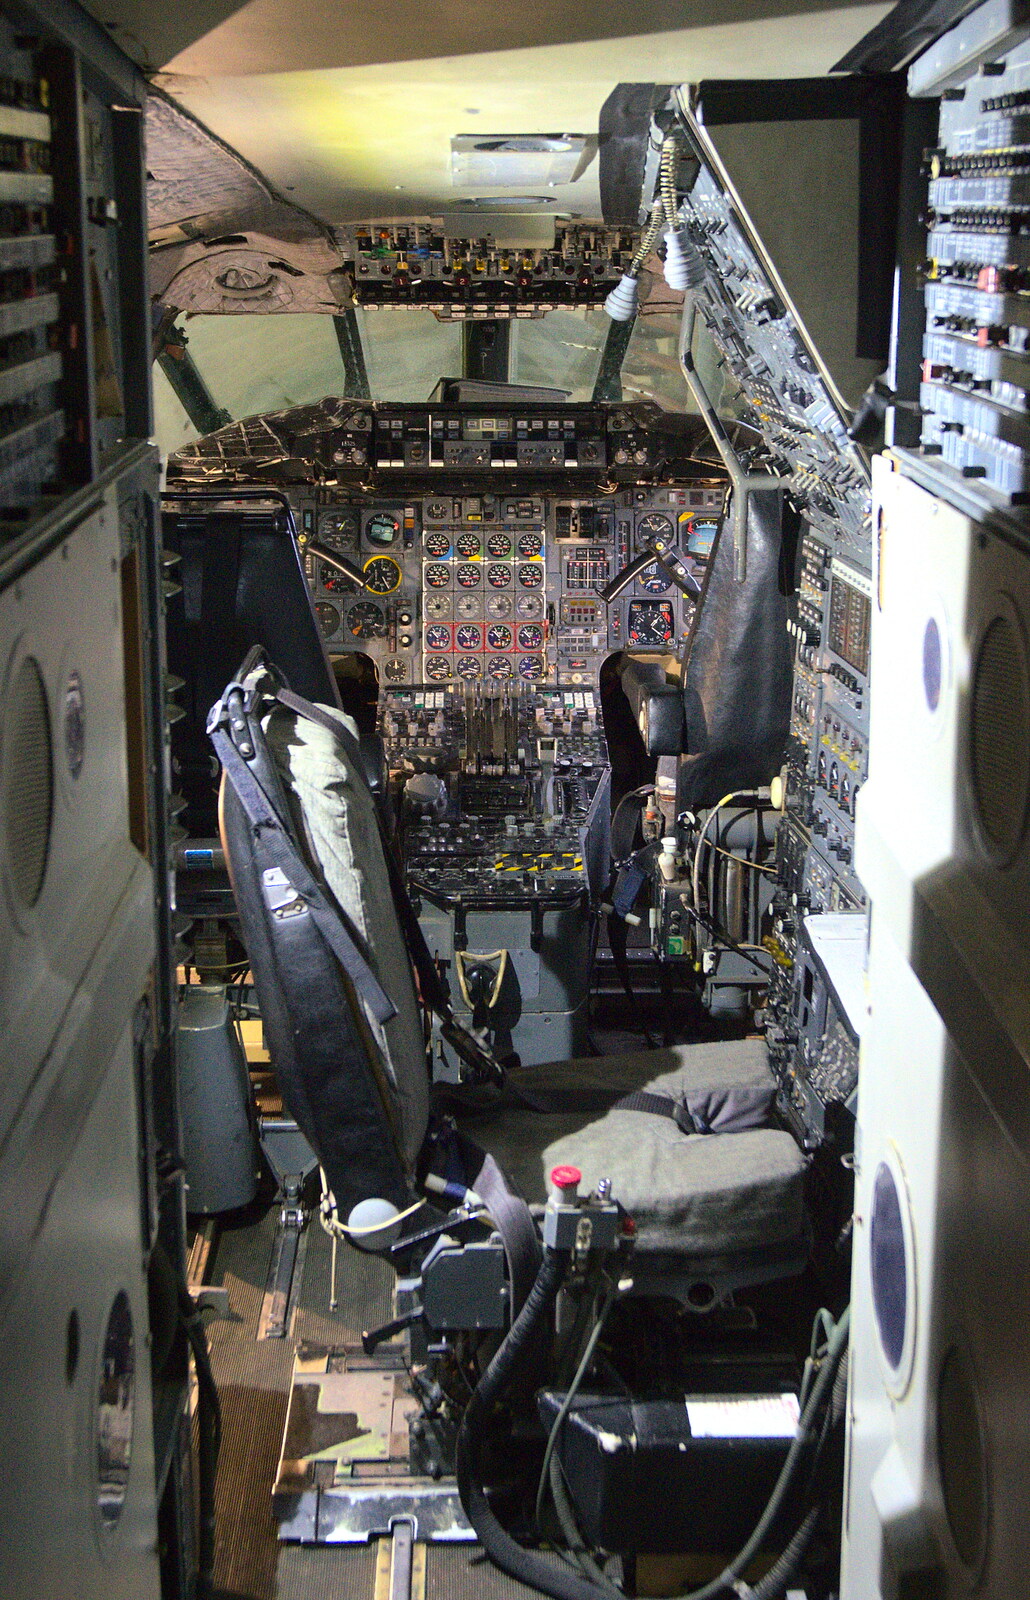 The pre-production Concorde's flight deck from A Day Out at Duxford, Cambridgeshire - 9th March 2014